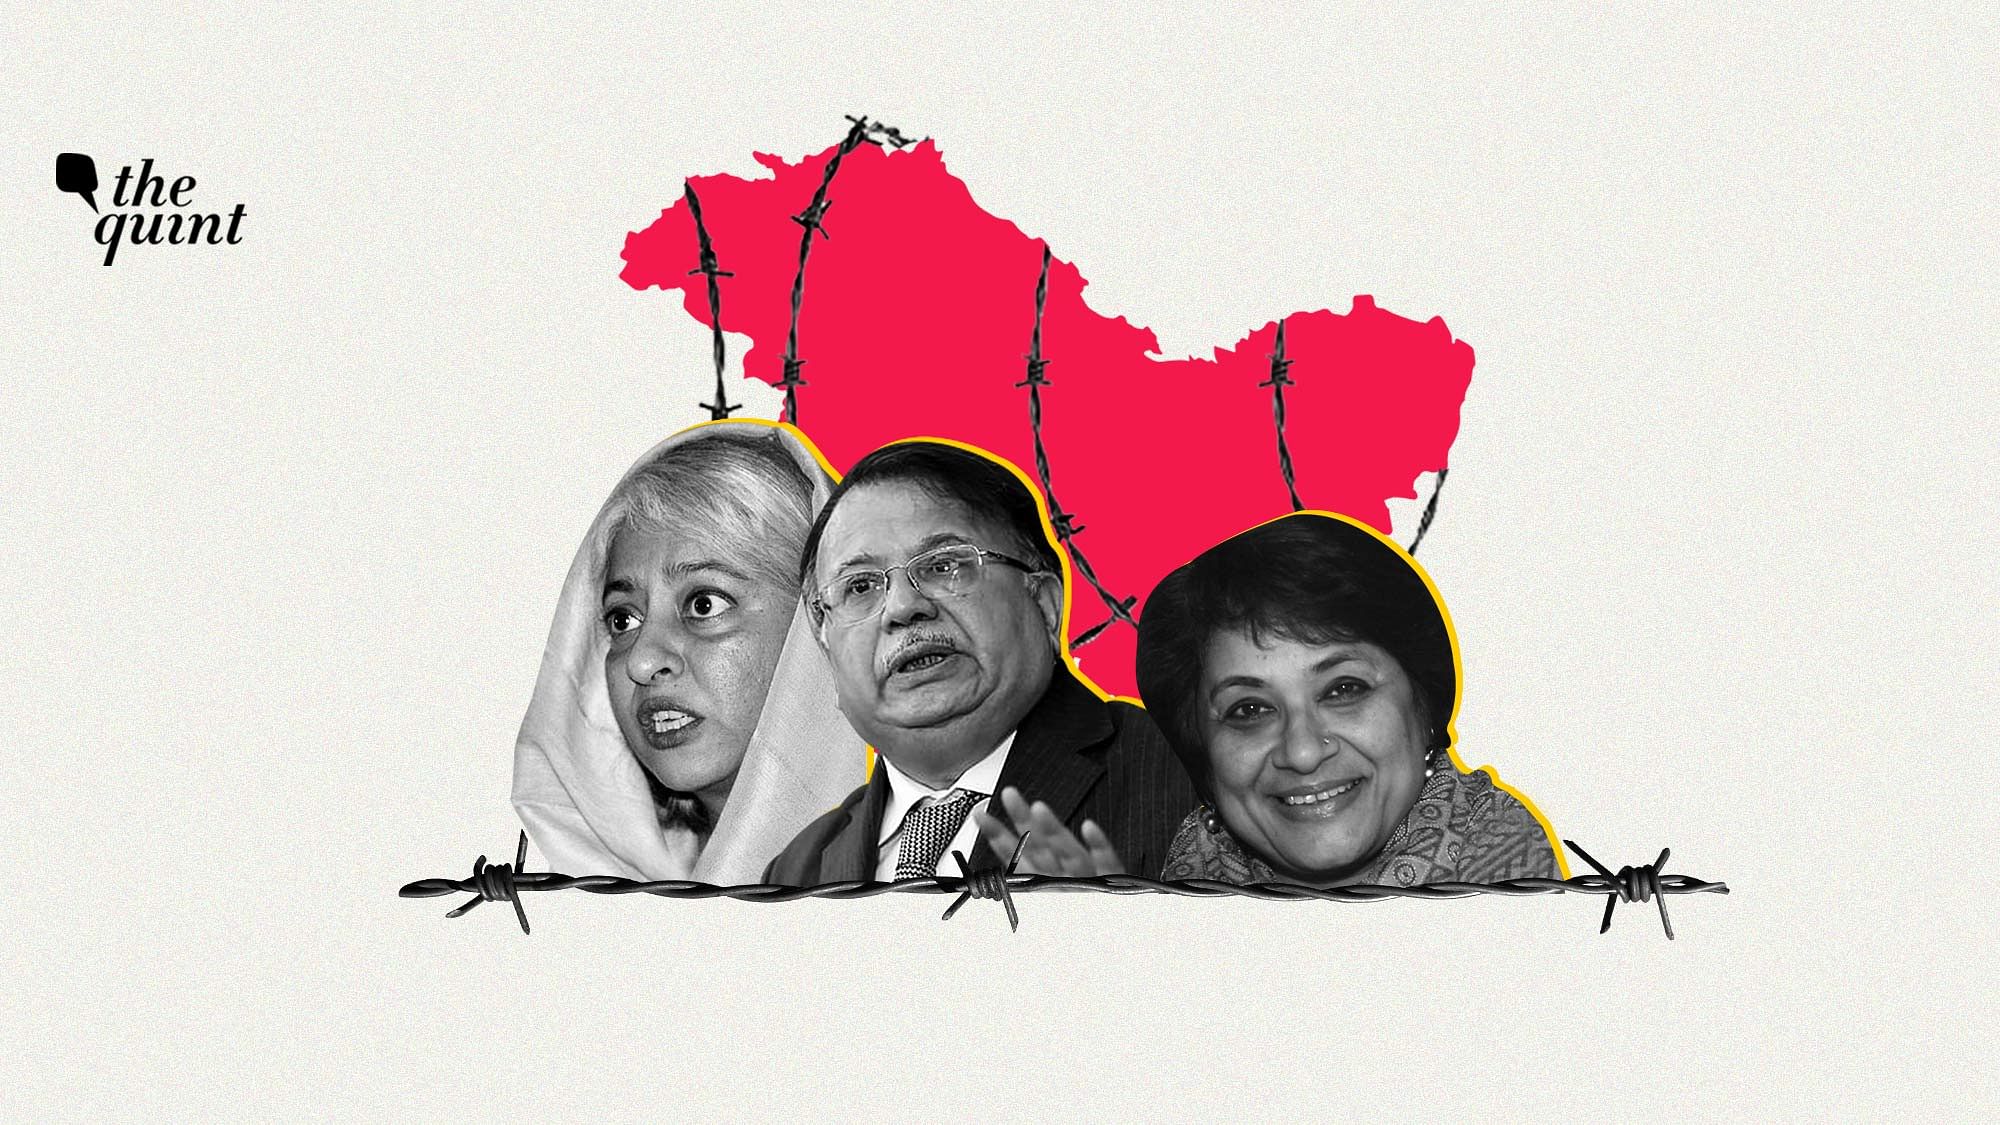 From L-R: Radha Kumar, Justice AP Shah and Enakshi Ganguly, members of the Forum For Human Rights in Jammu and Kashmir.